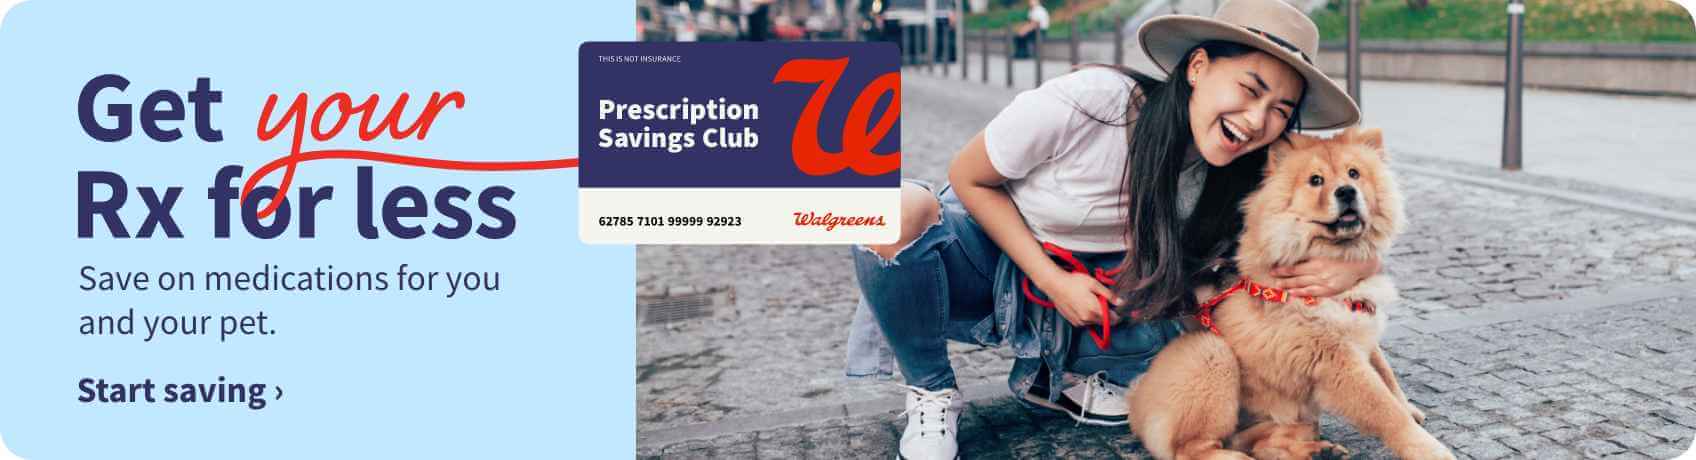 Get your prescriptions for less. Save on medications for you and your pet. Walgreens Prescription Savings Club. Start saving.